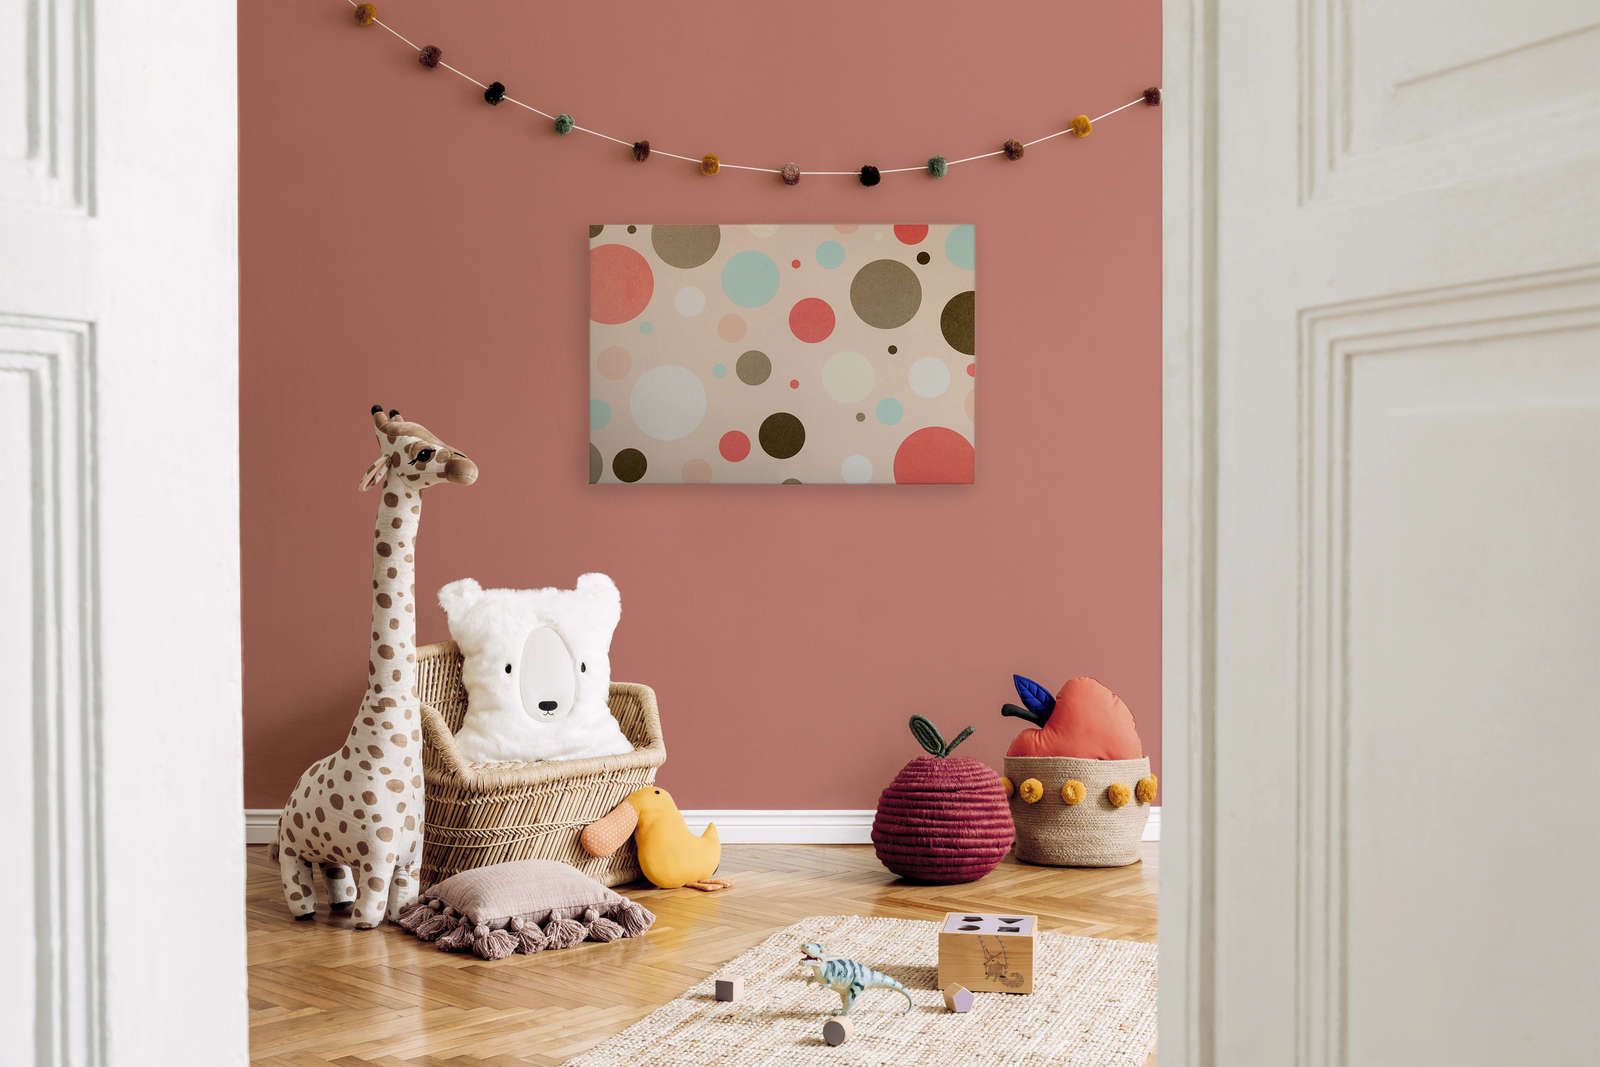             Canvas for children's room with colourful circles - 90 cm x 60 cm
        